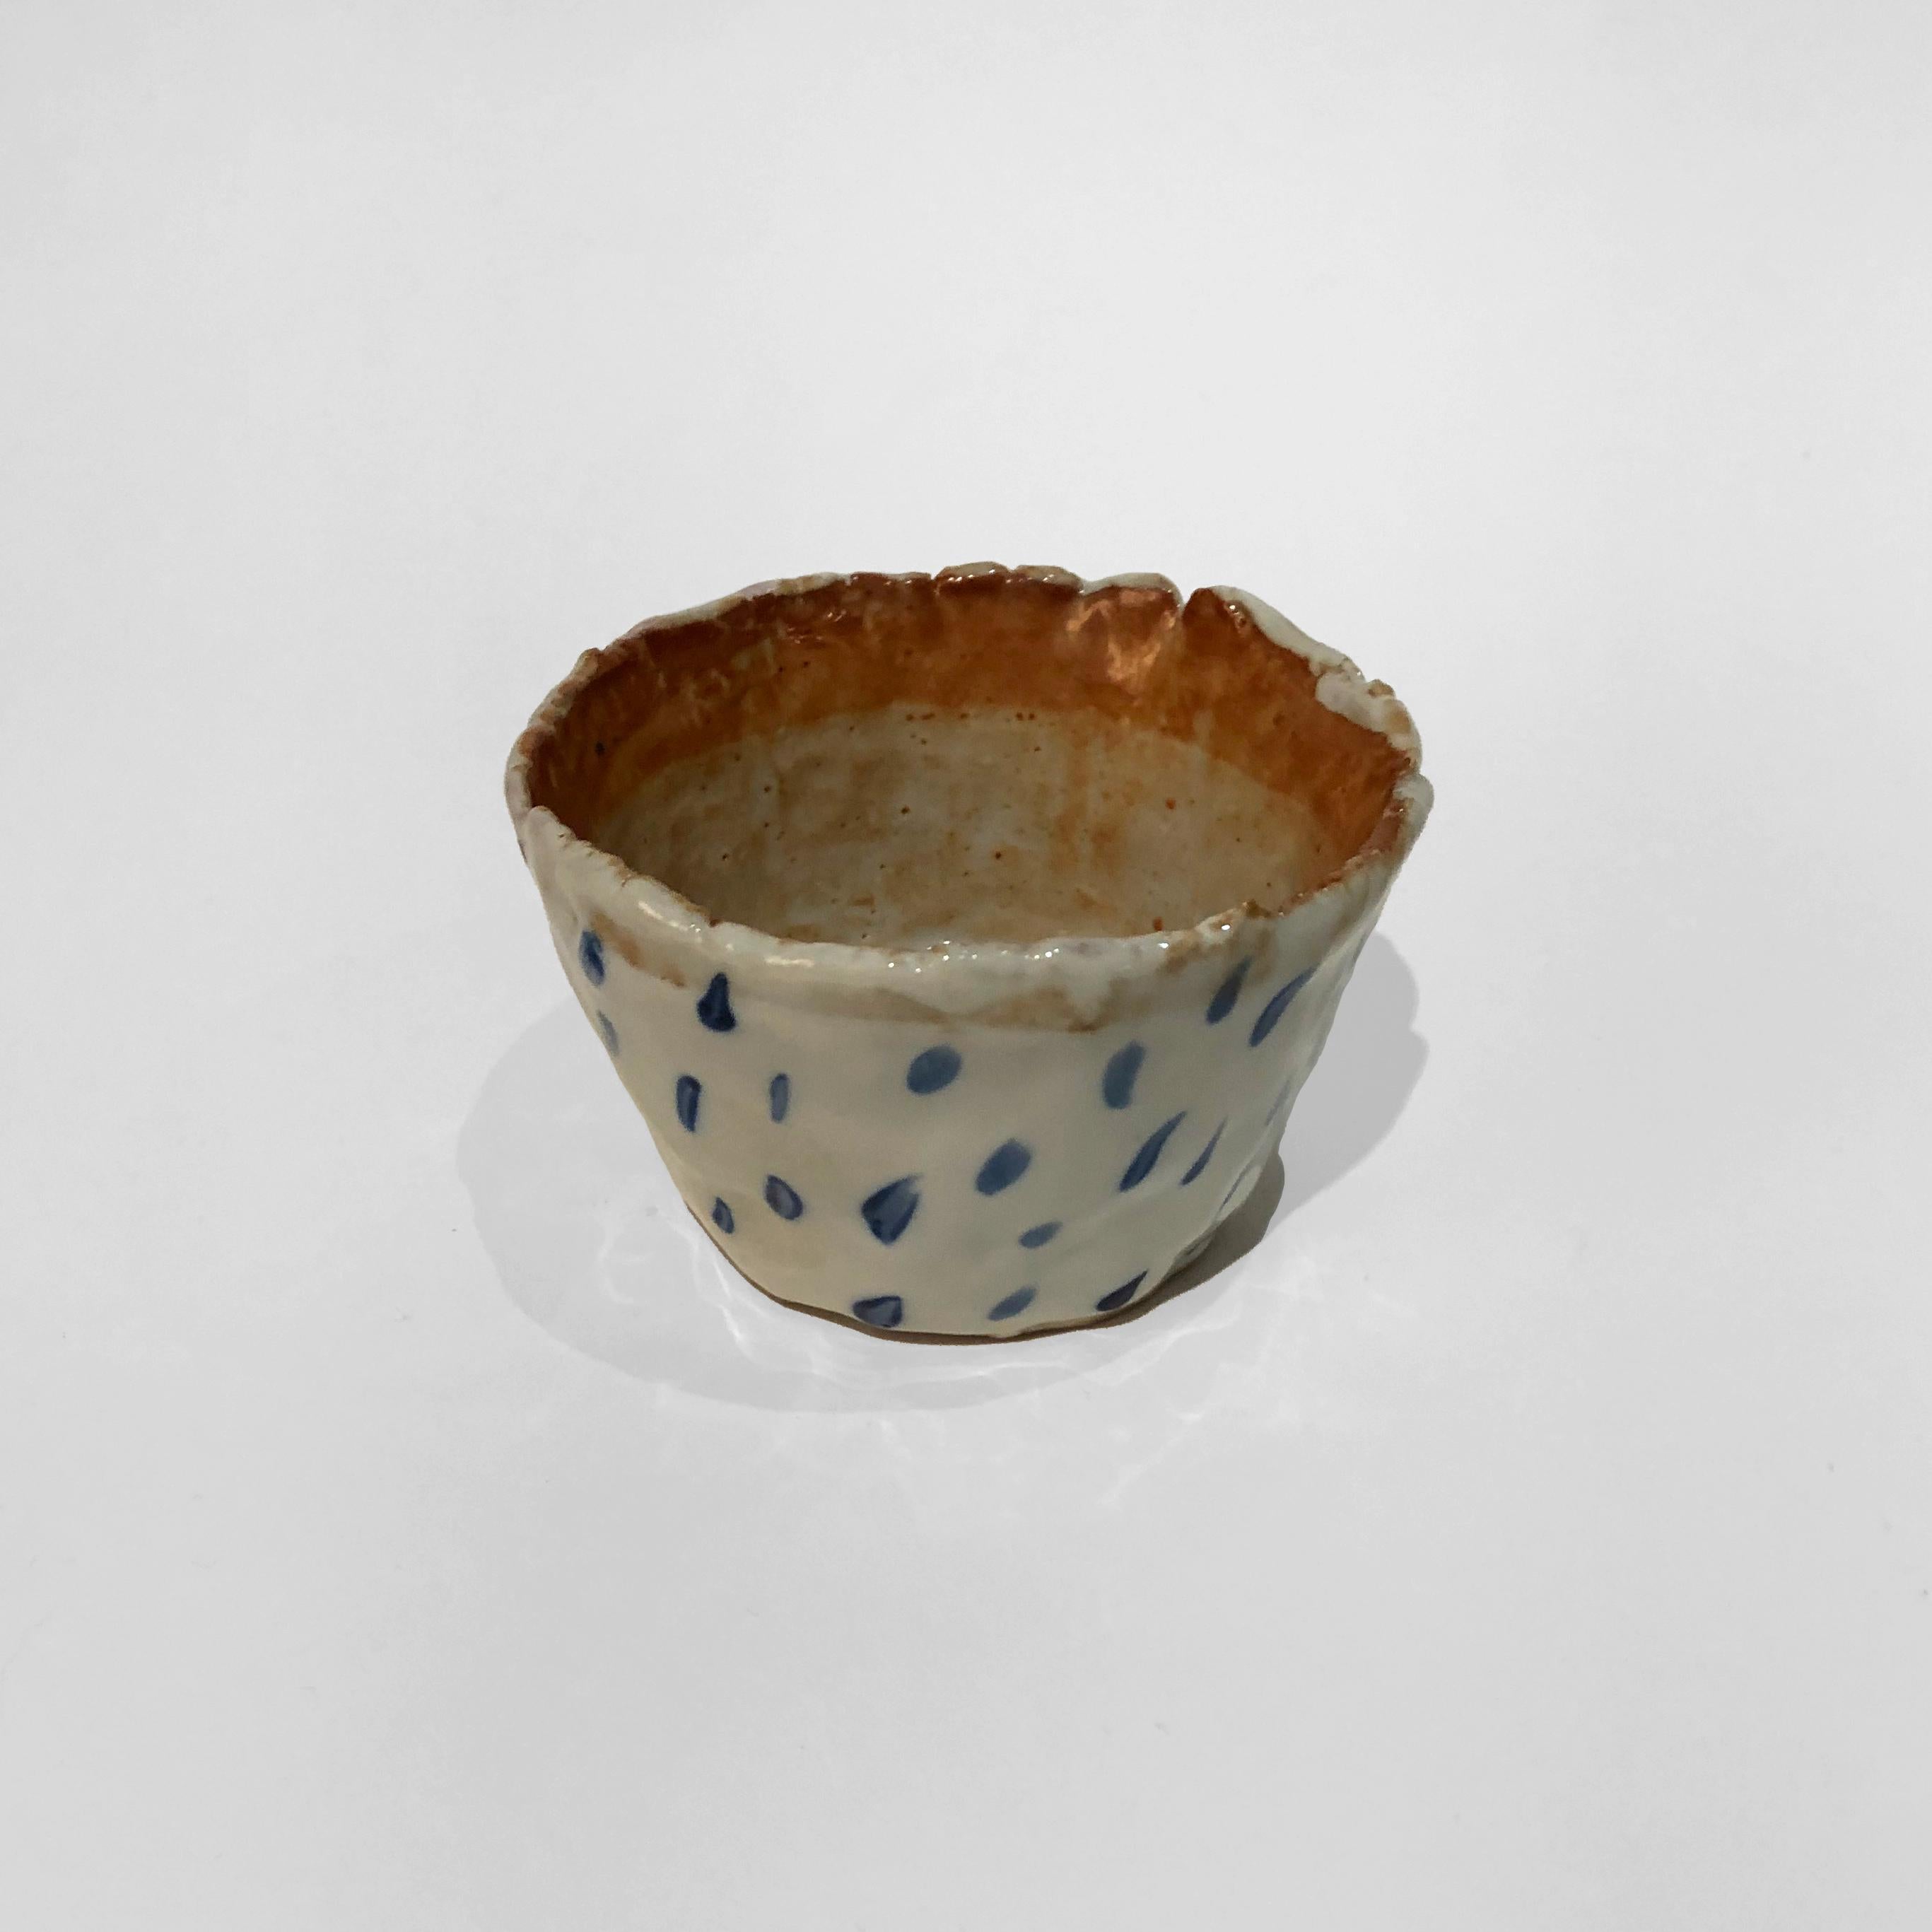 Hand-Crafted Ceramic Handbuilt Stoneware Bowl and Plate by Hannelore Freer